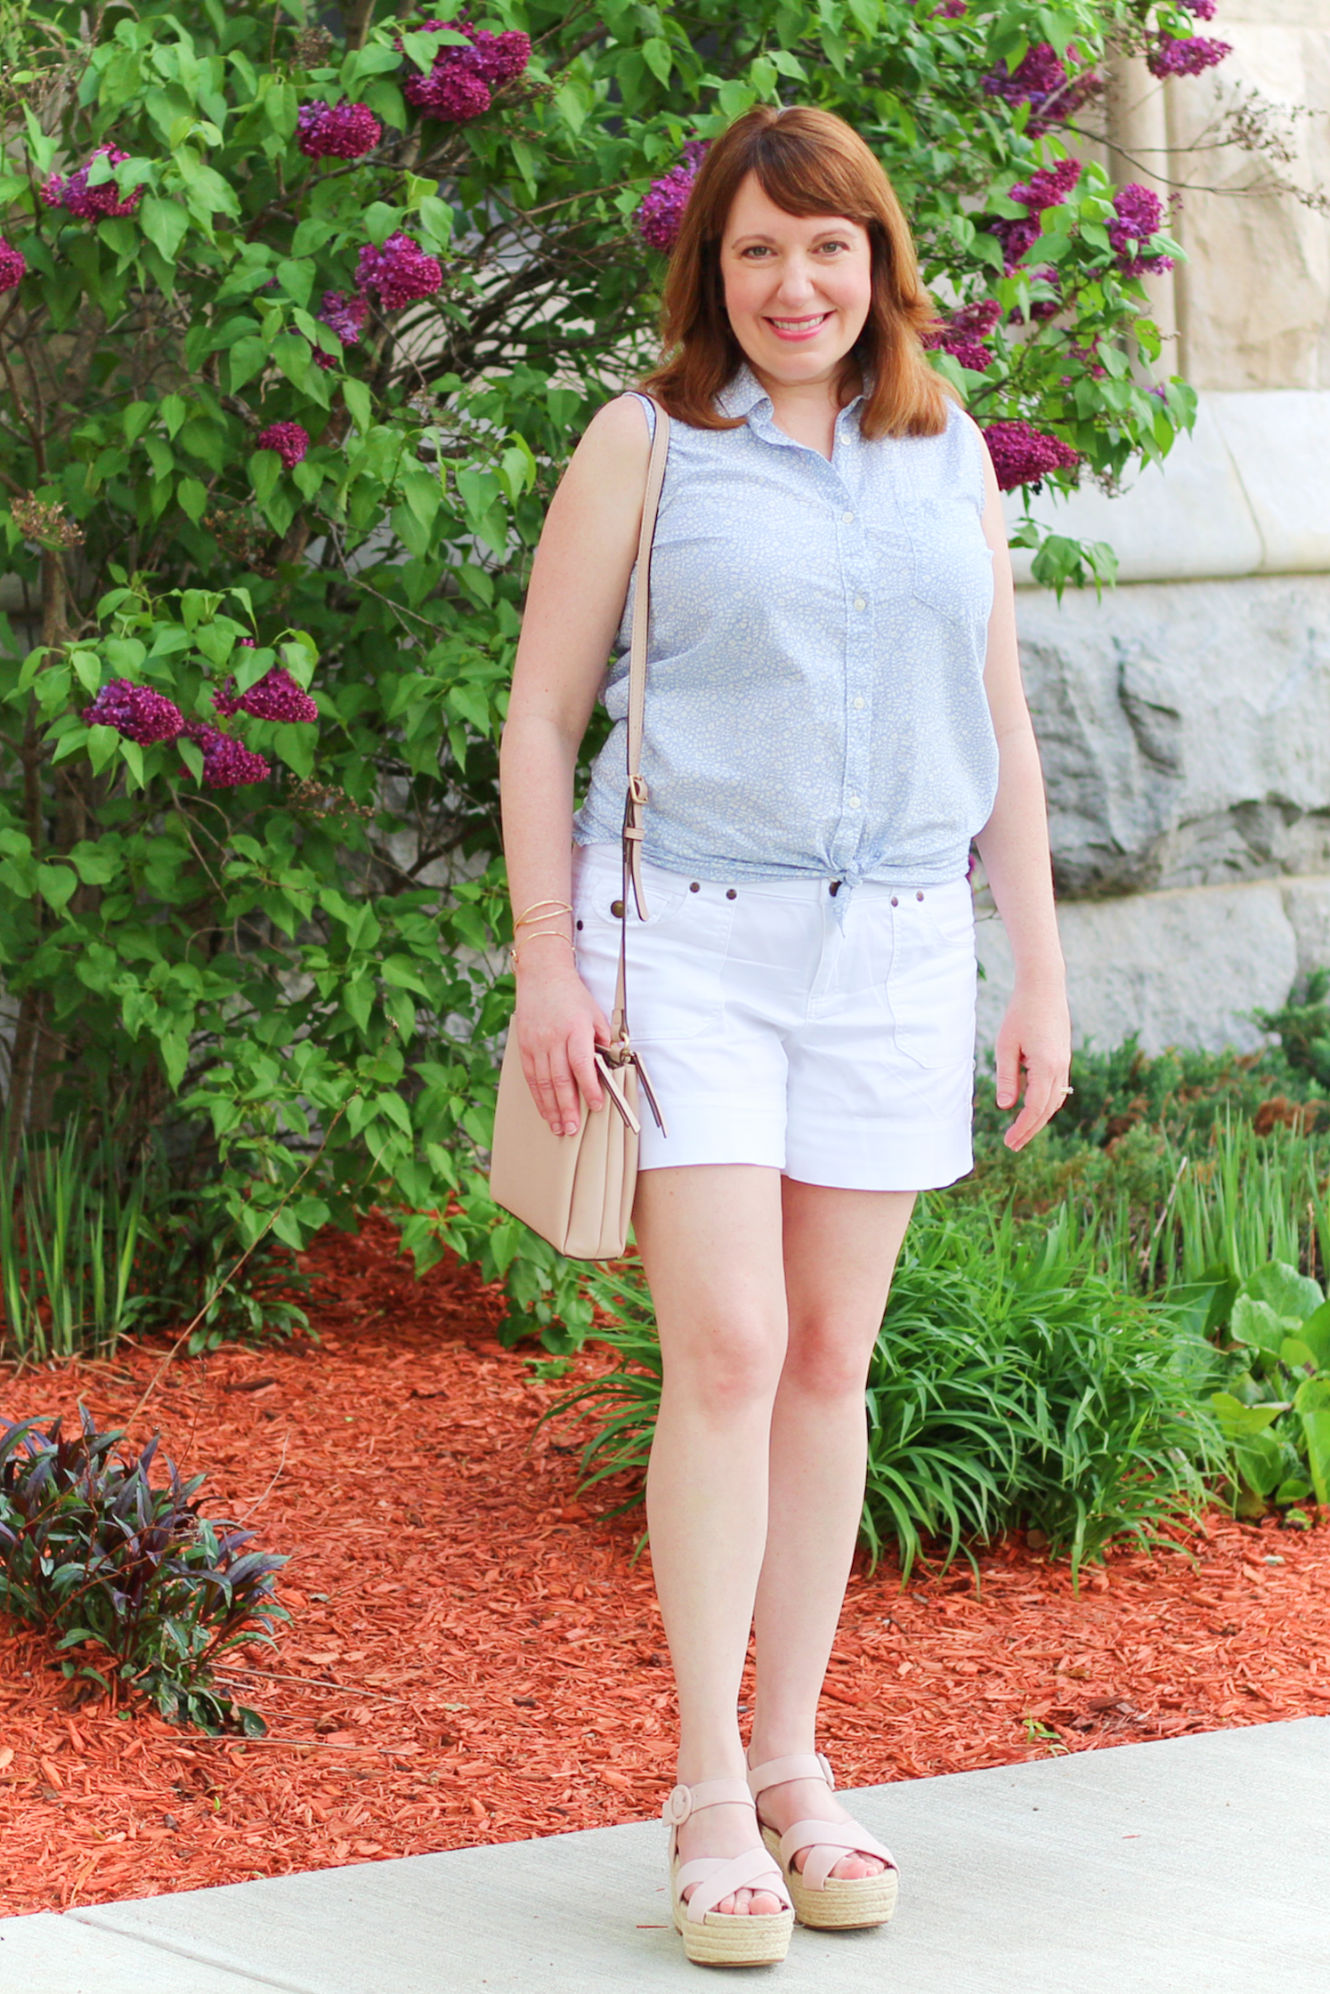 Spring/Summer Outfits #fashion #style